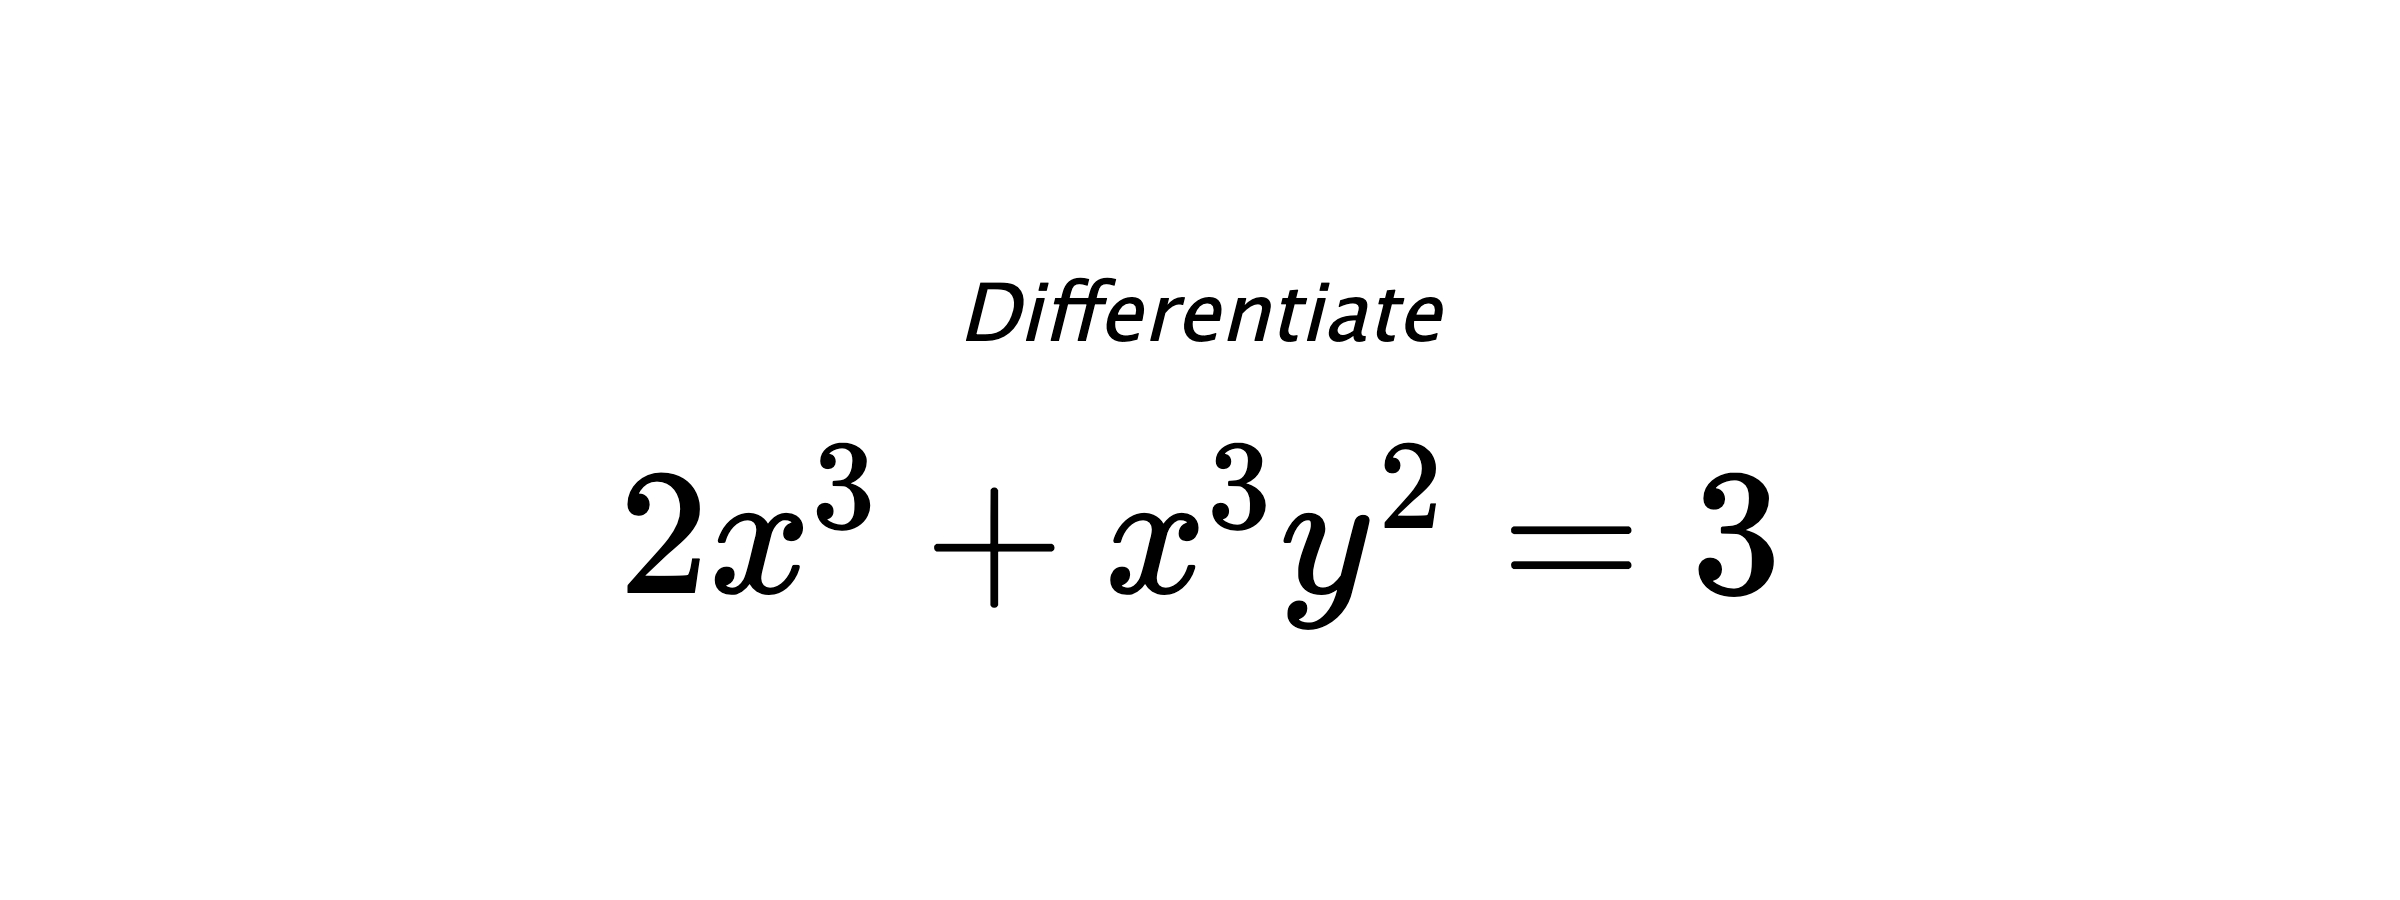 Differentiate $ 2x^3+x^3y^2 = 3 $